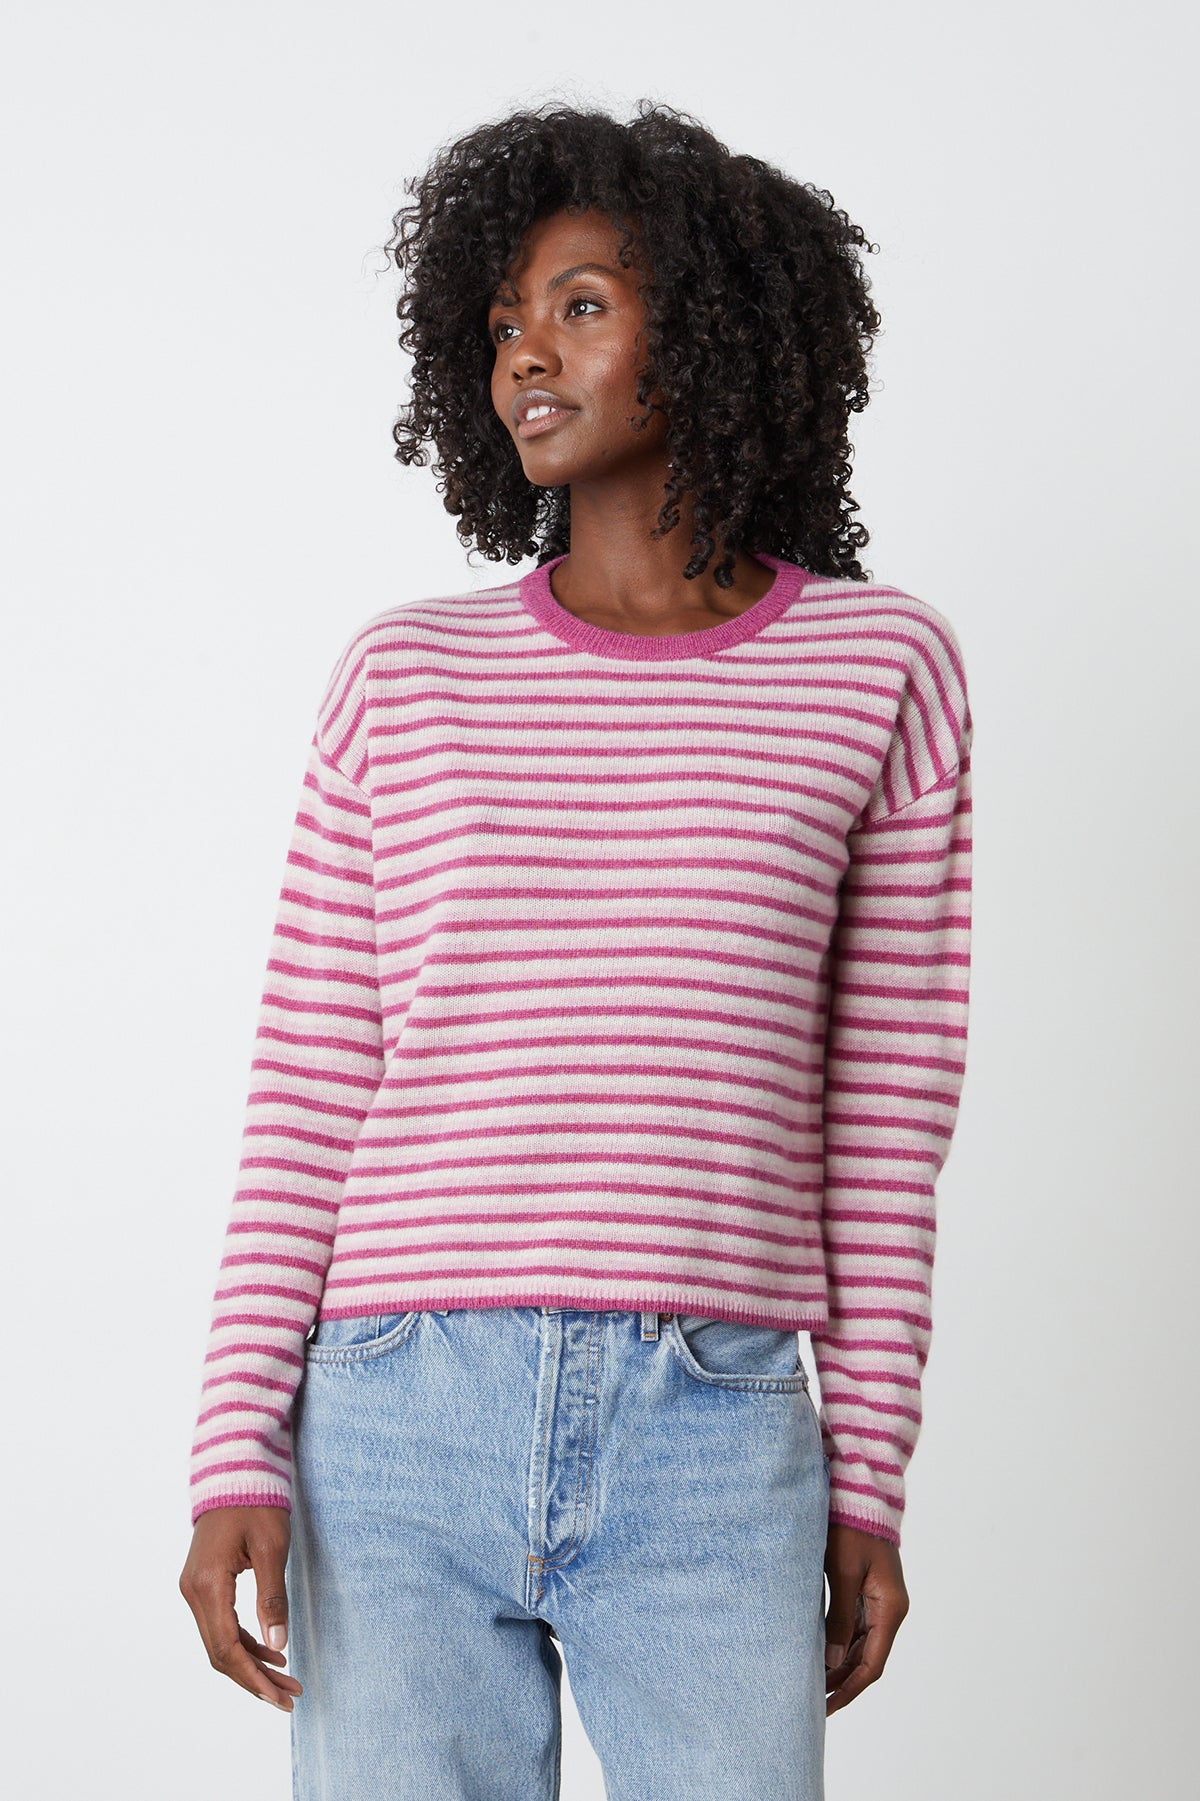   a model wearing CADIE CASHMERE STRIPED SWEATER by Velvet by Graham & Spencer and jeans. 